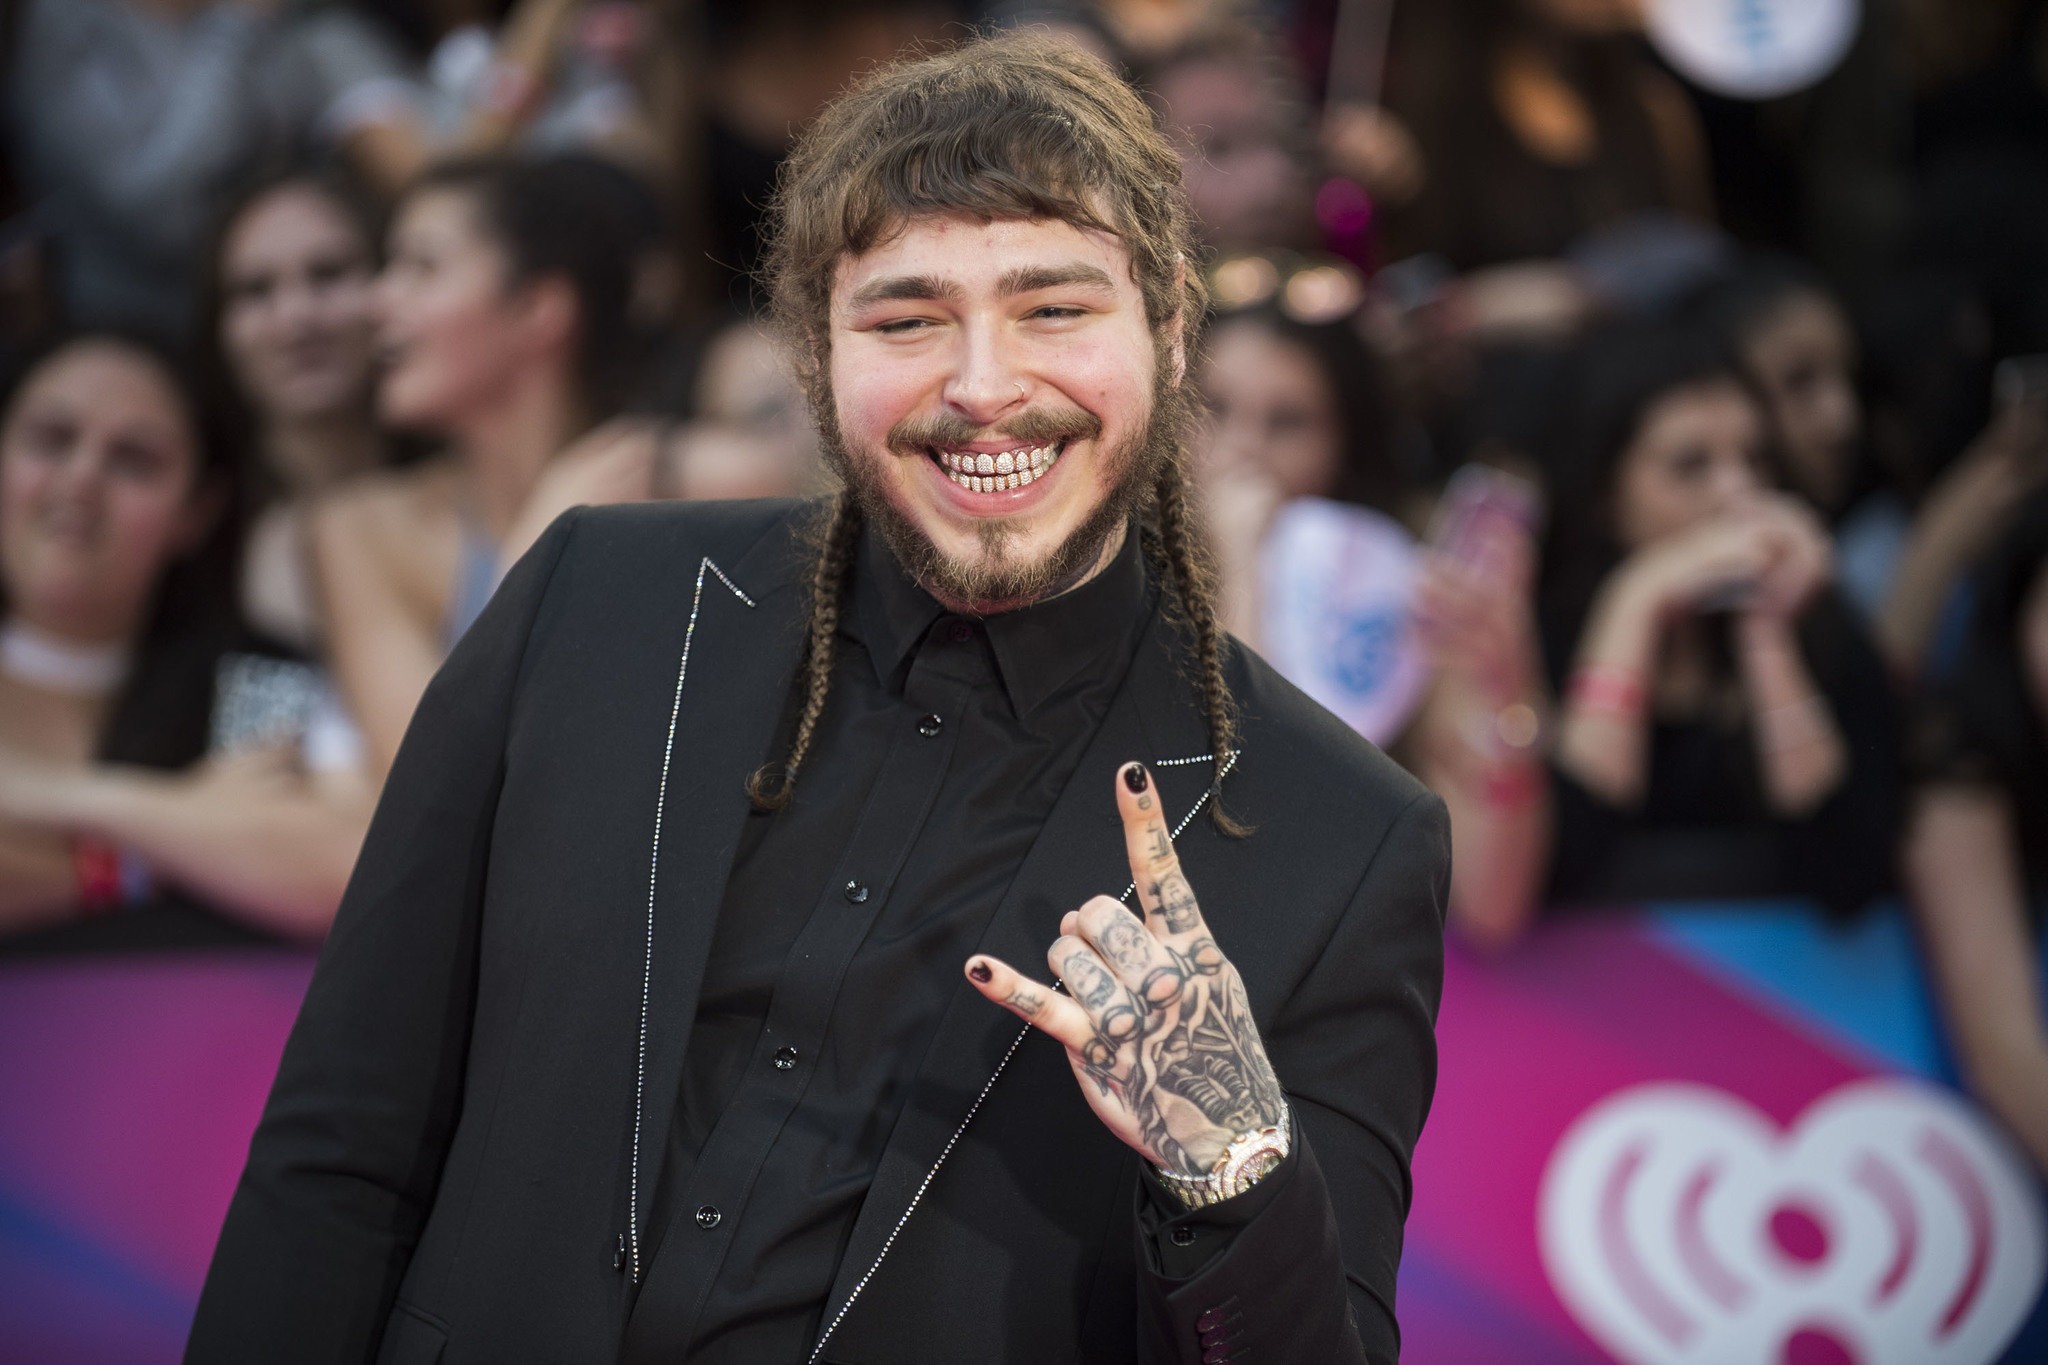 Post Malone Will Be Donating 10,000 of His Sold Out Crocs To Frontline